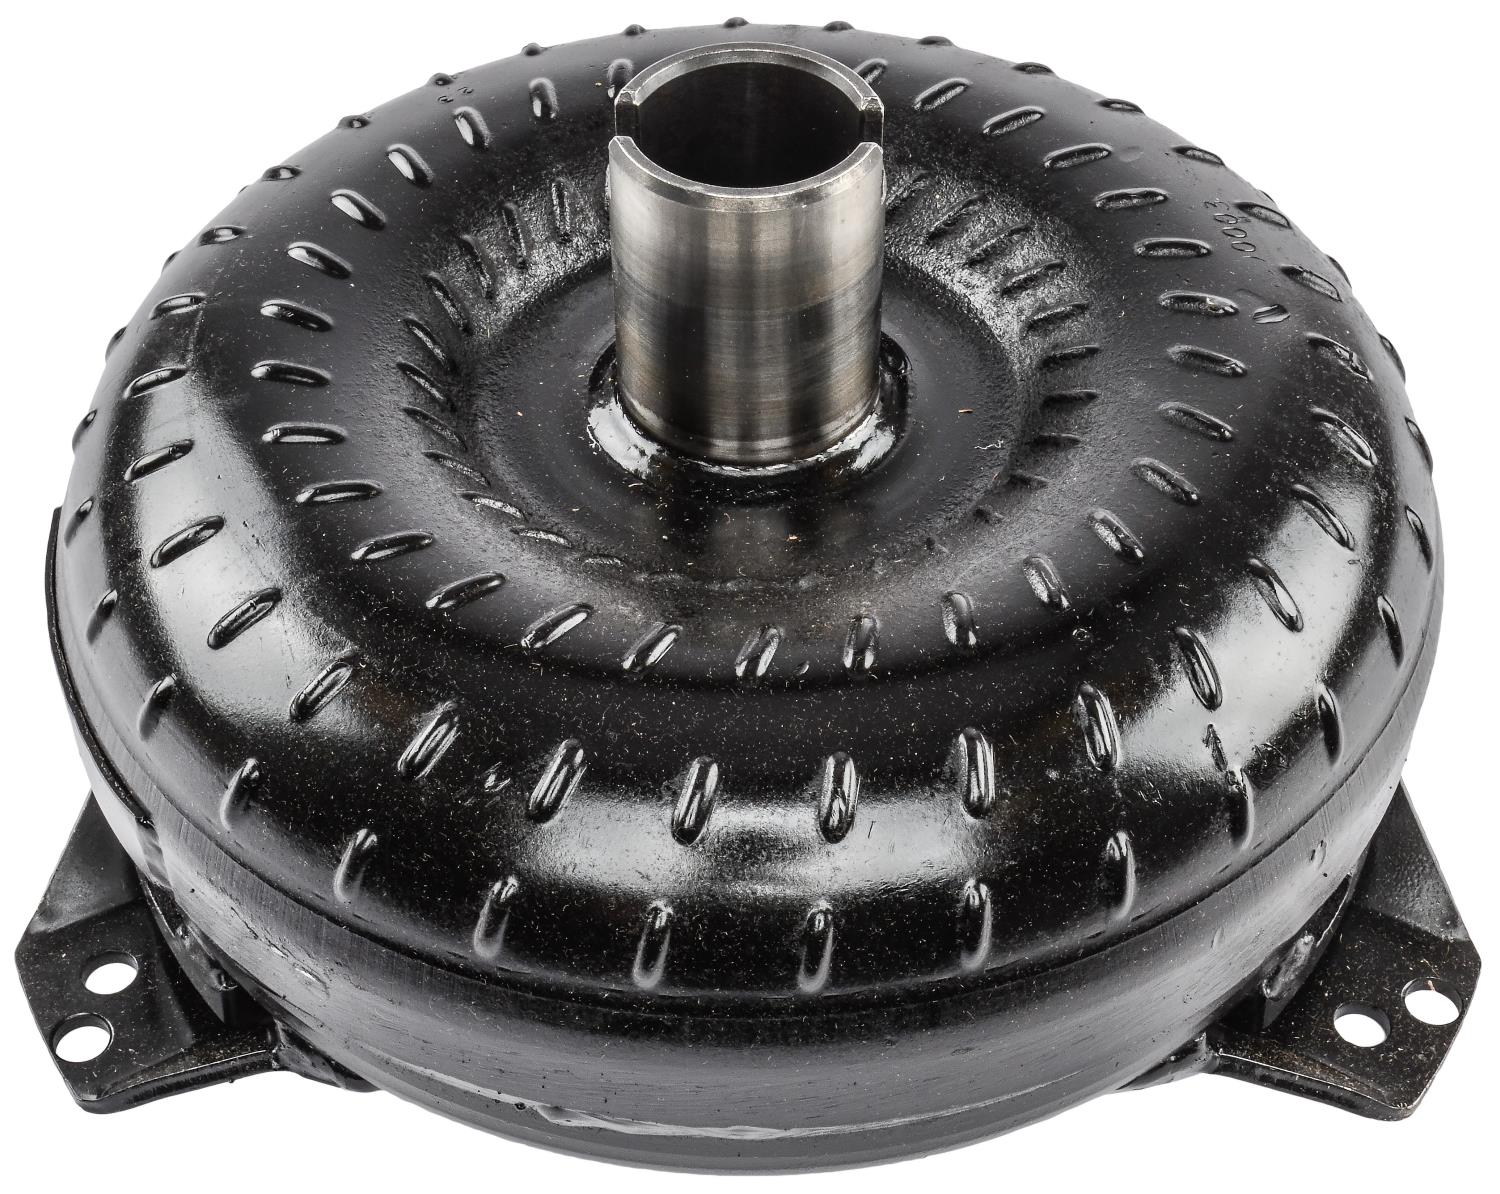 Torque Converter for GM TH350/TH400 [3500-3800 RPM Stall Speed]